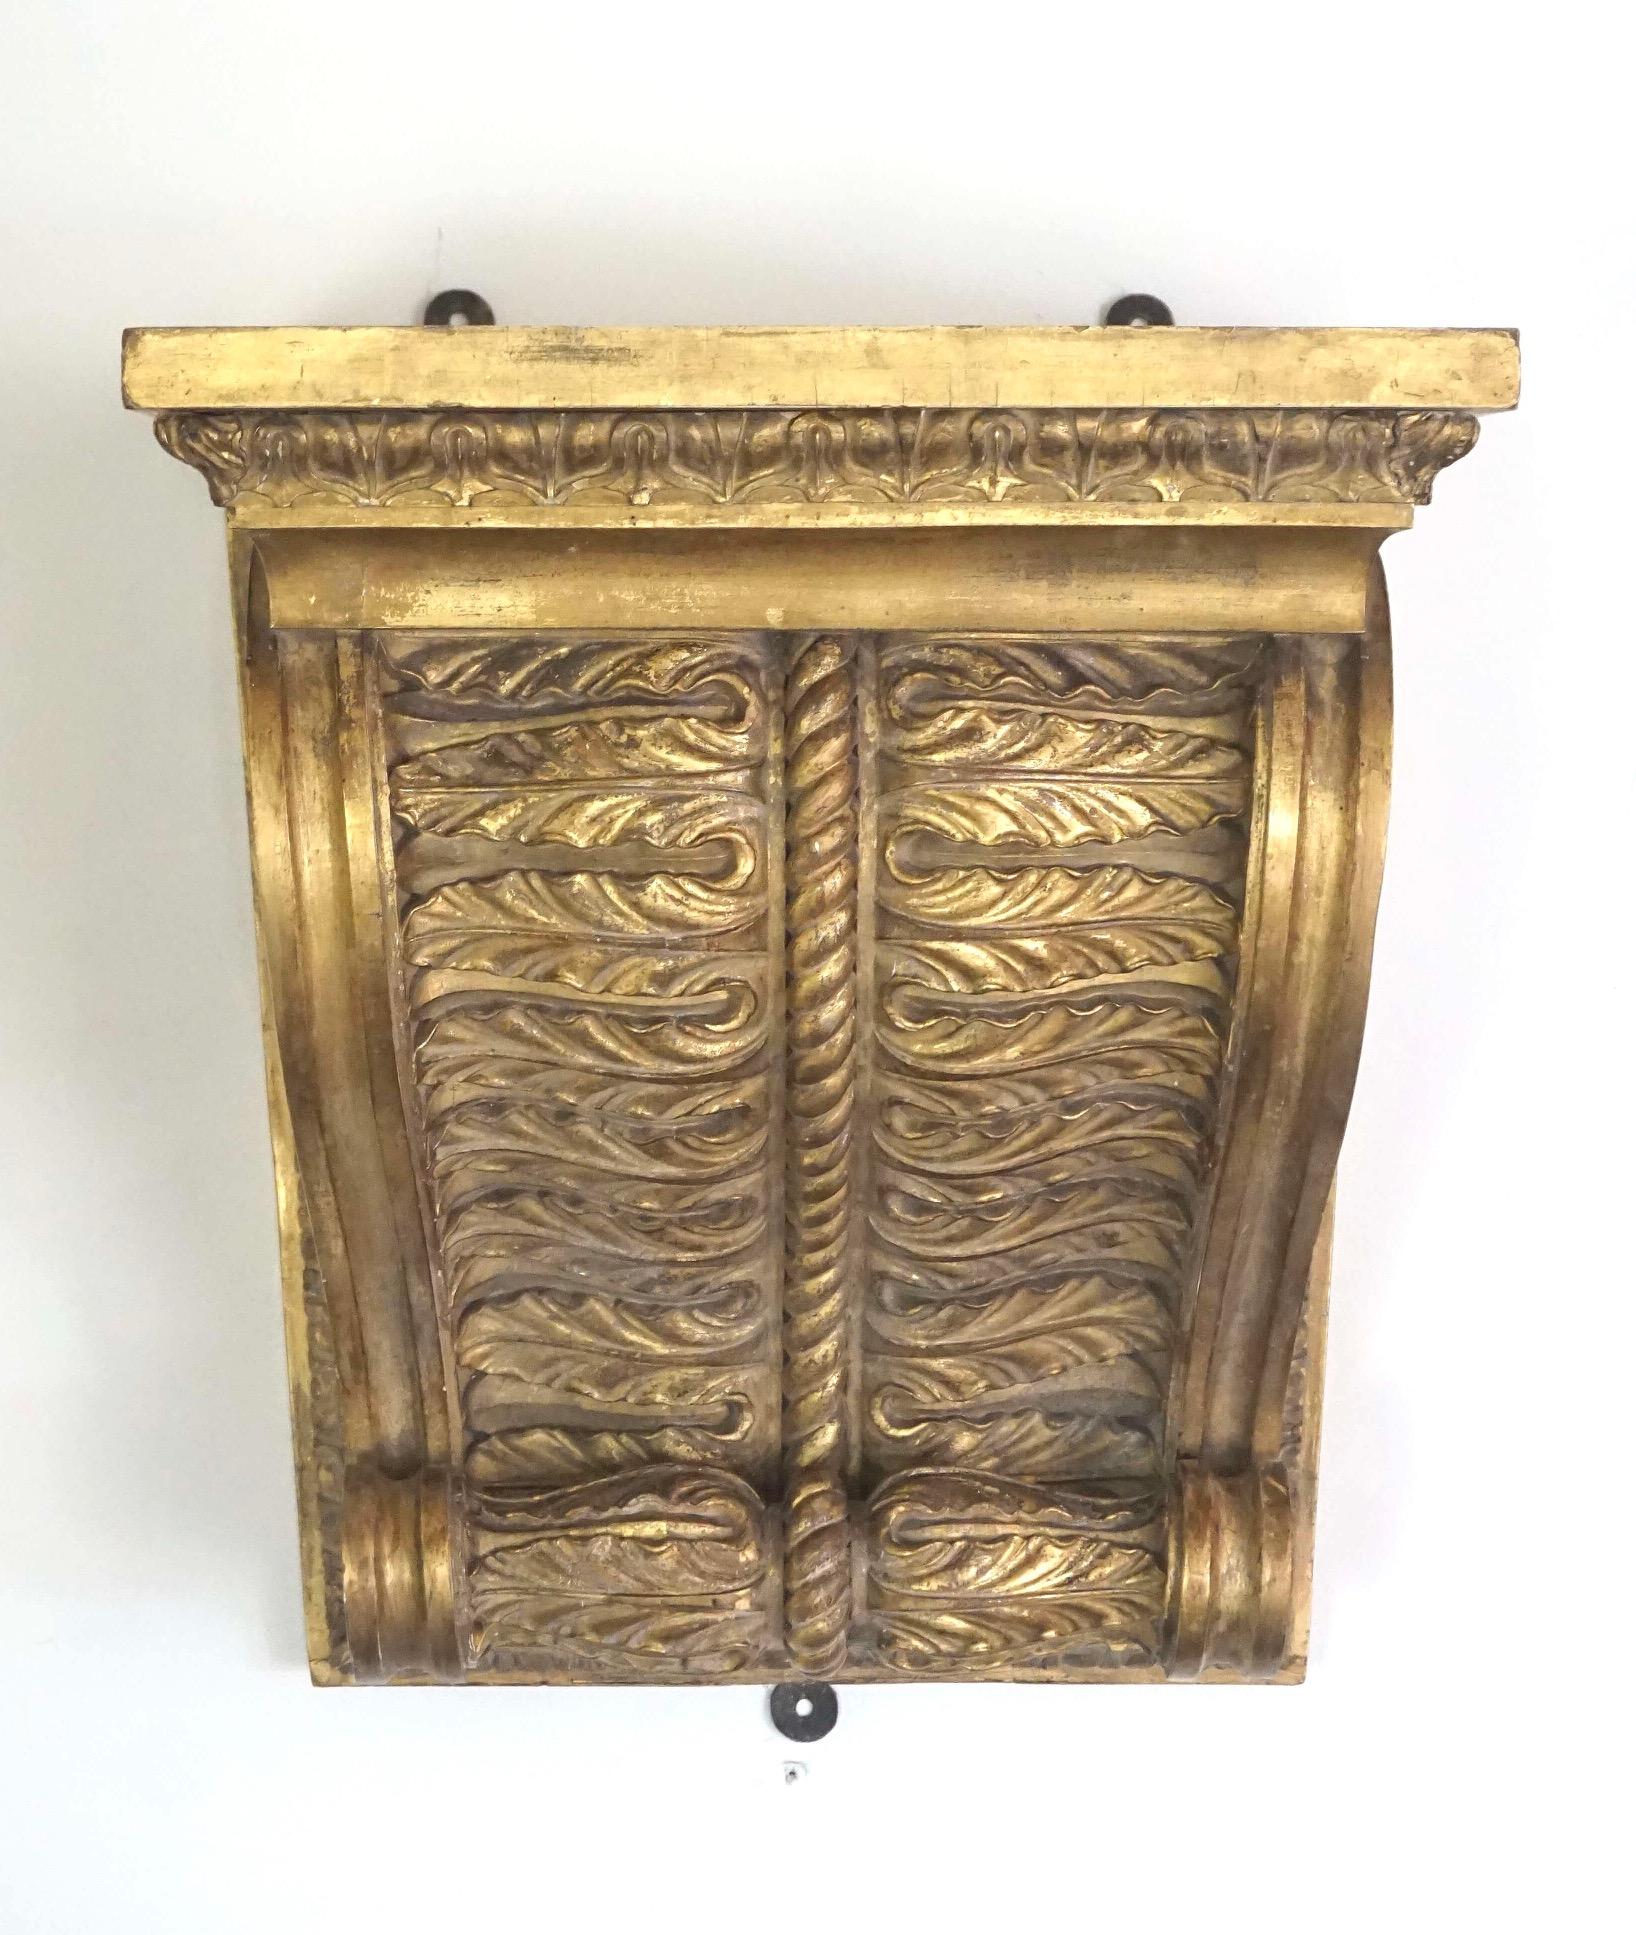 A rare, exceptional, and monumentally scaled circa 1825 English Regency George IV period giltwood wall bracket or shelf of corbel form having rectangular plinth shelf above double spiral acanthus, lotus, and rope motif support. Originally used as a